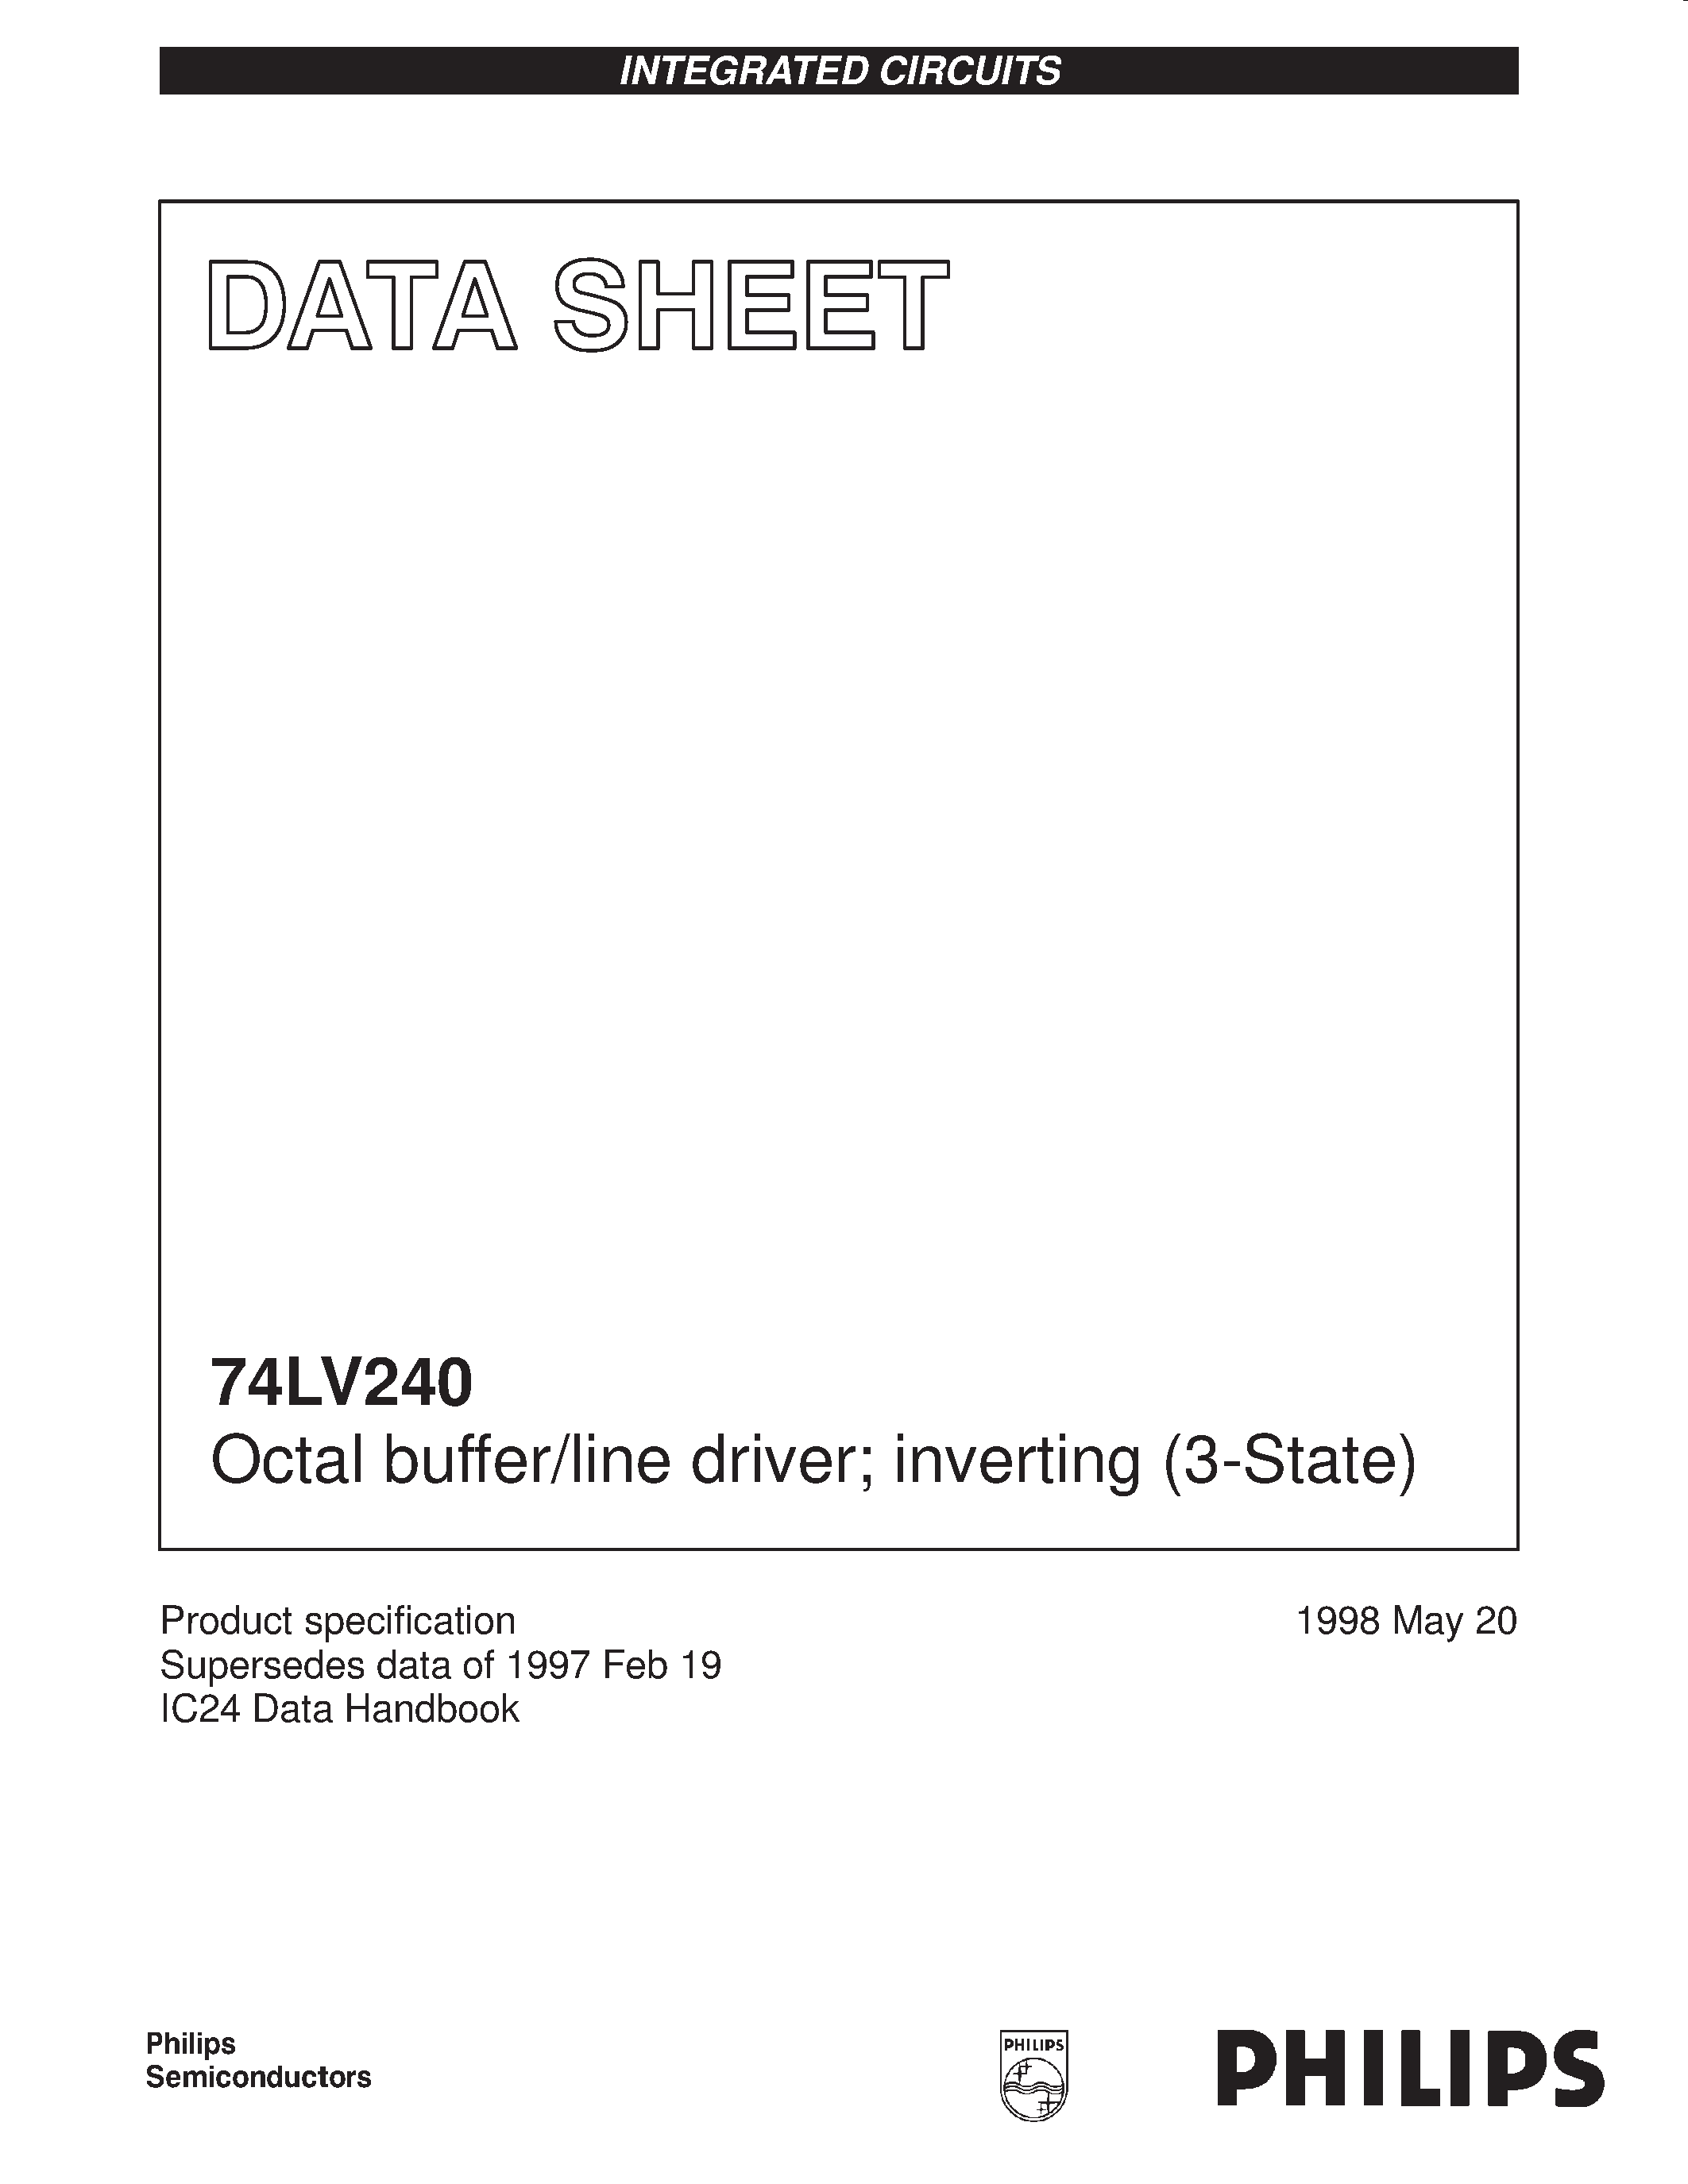 Datasheet 74LV240 - Octal buffer/line driver; inverting 3-State page 1